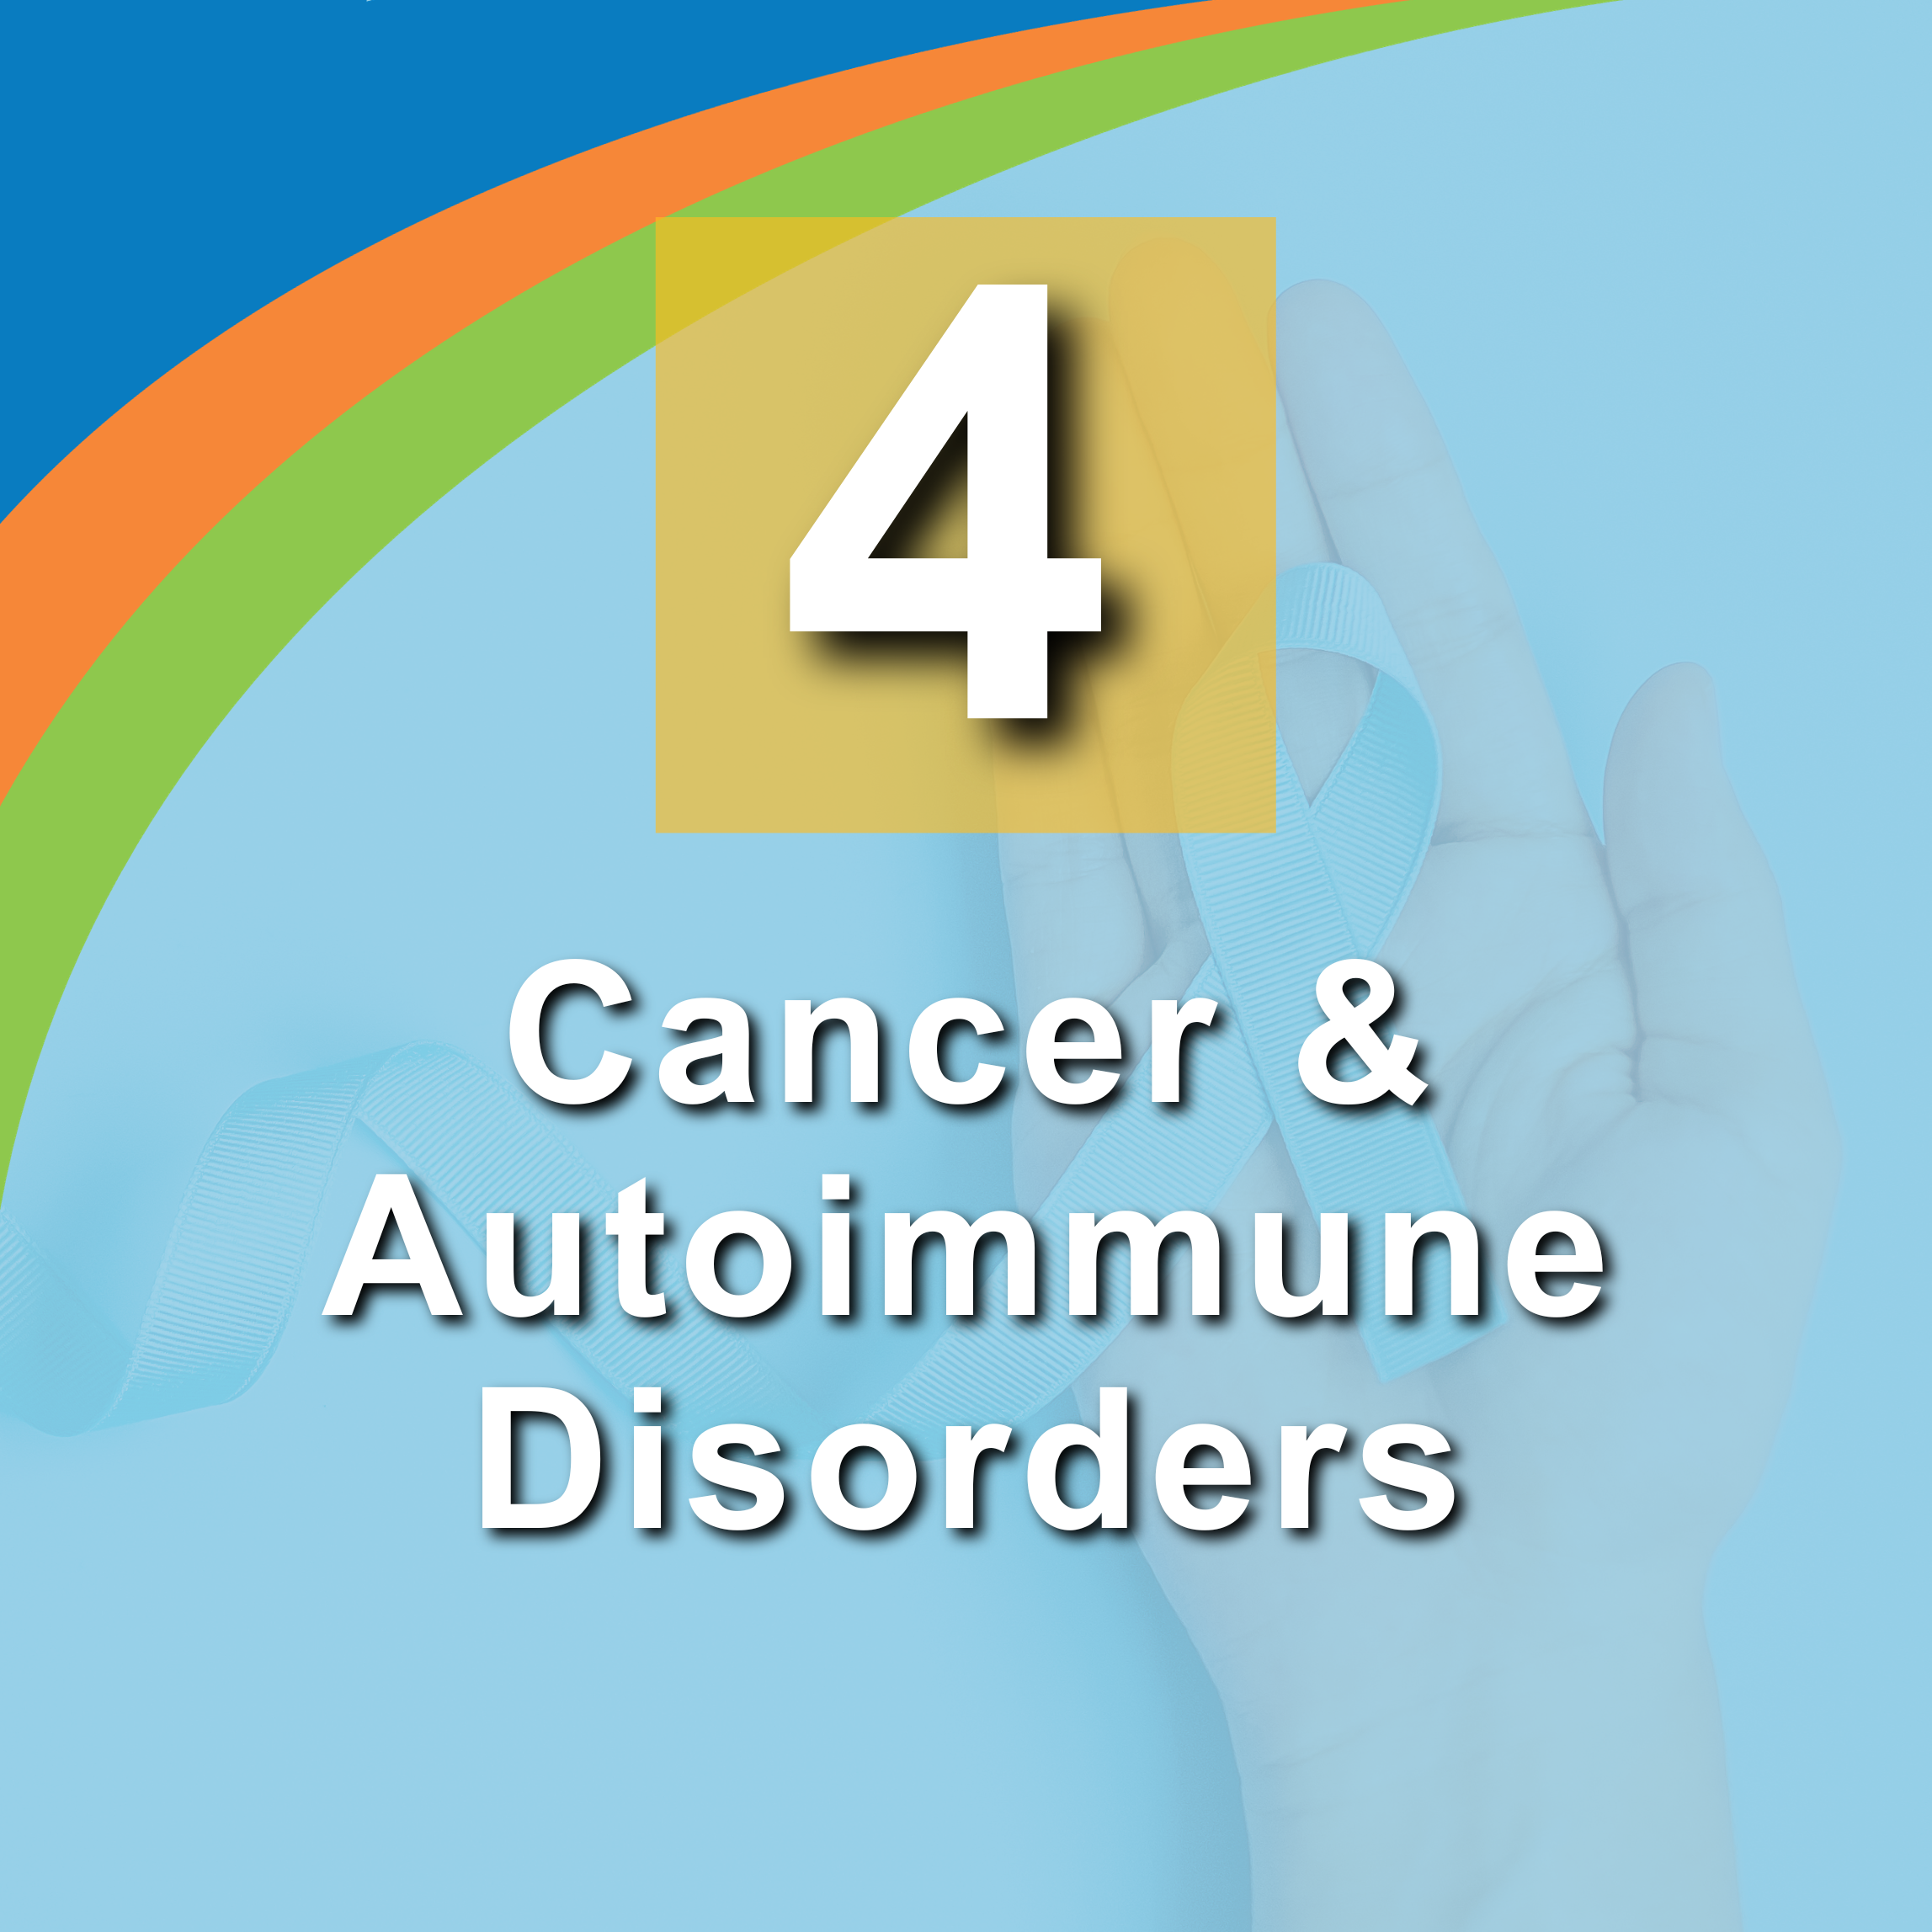 4. Cancer and Autoimmune Disorders